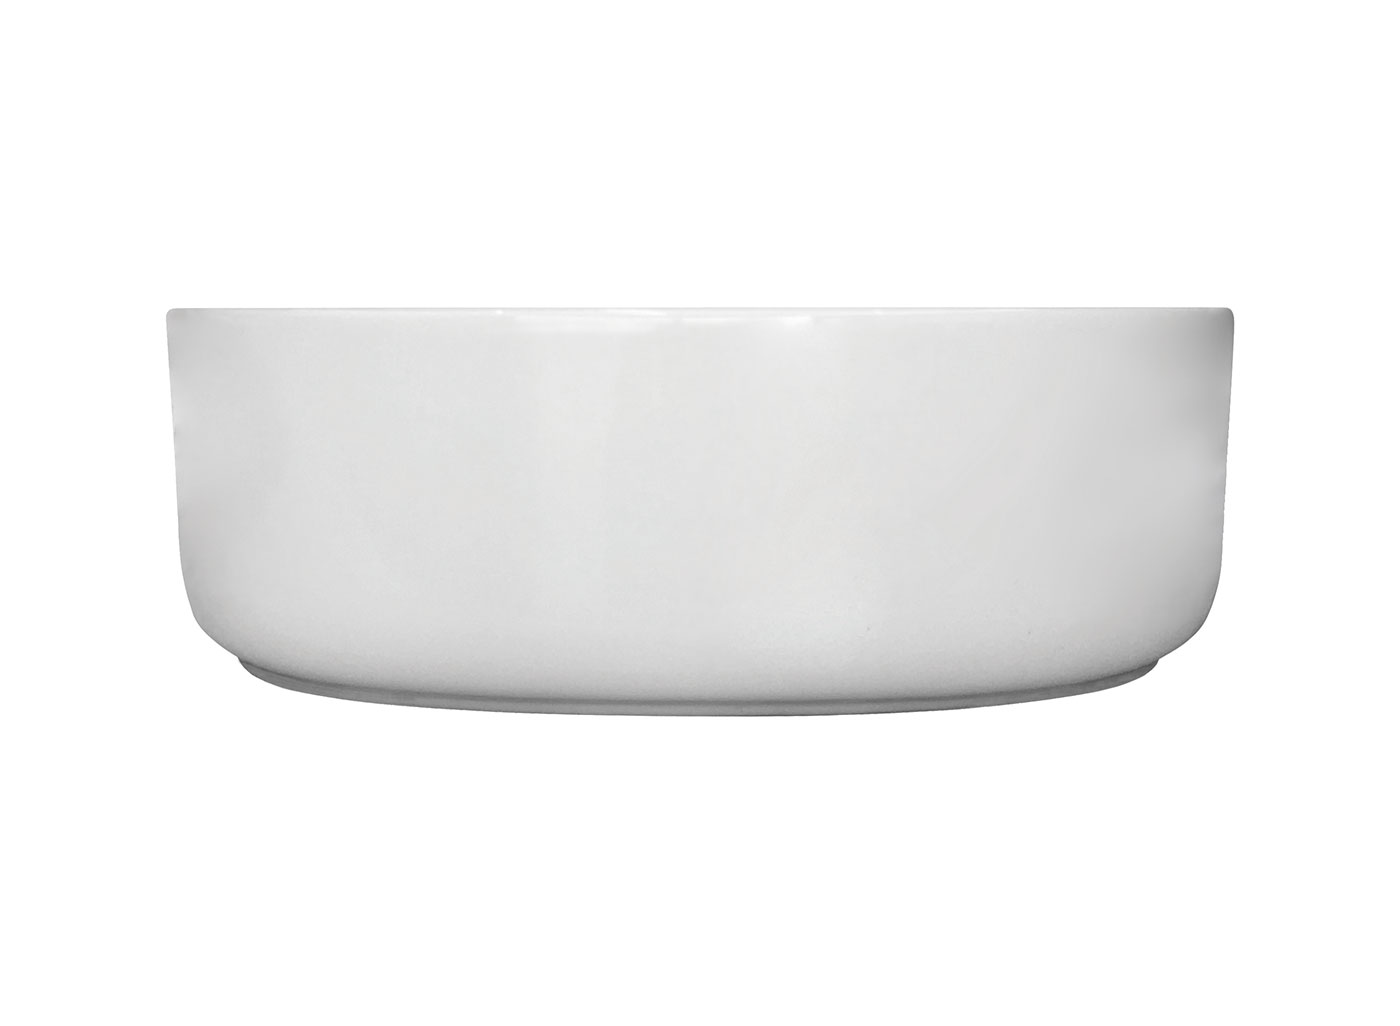 and fresh. They are the perfect basin to bring a modern vintage look to your bathroom.